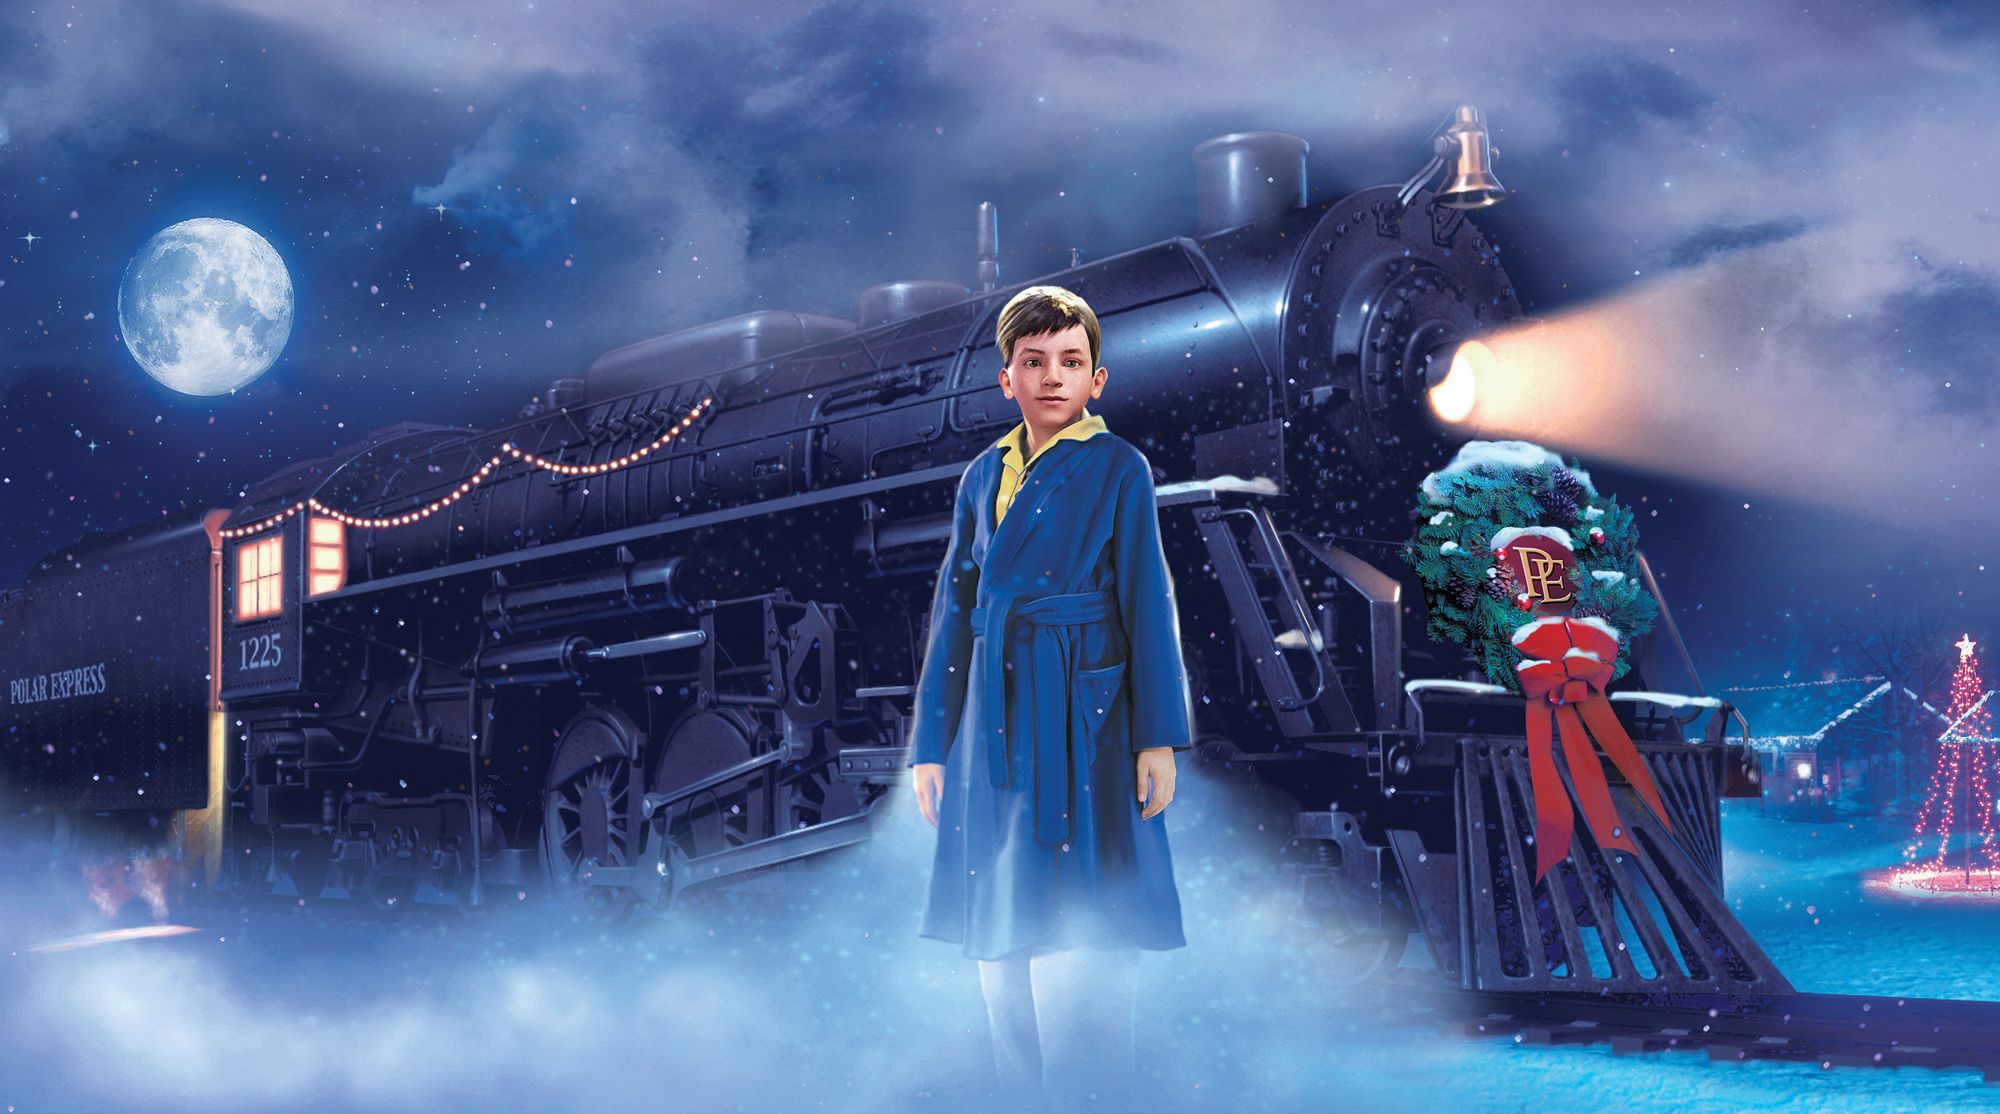 THE POLAR EXPRESS | These Christmas Movies Will Get You Into The Holiday Spirit | Popcorn Banter